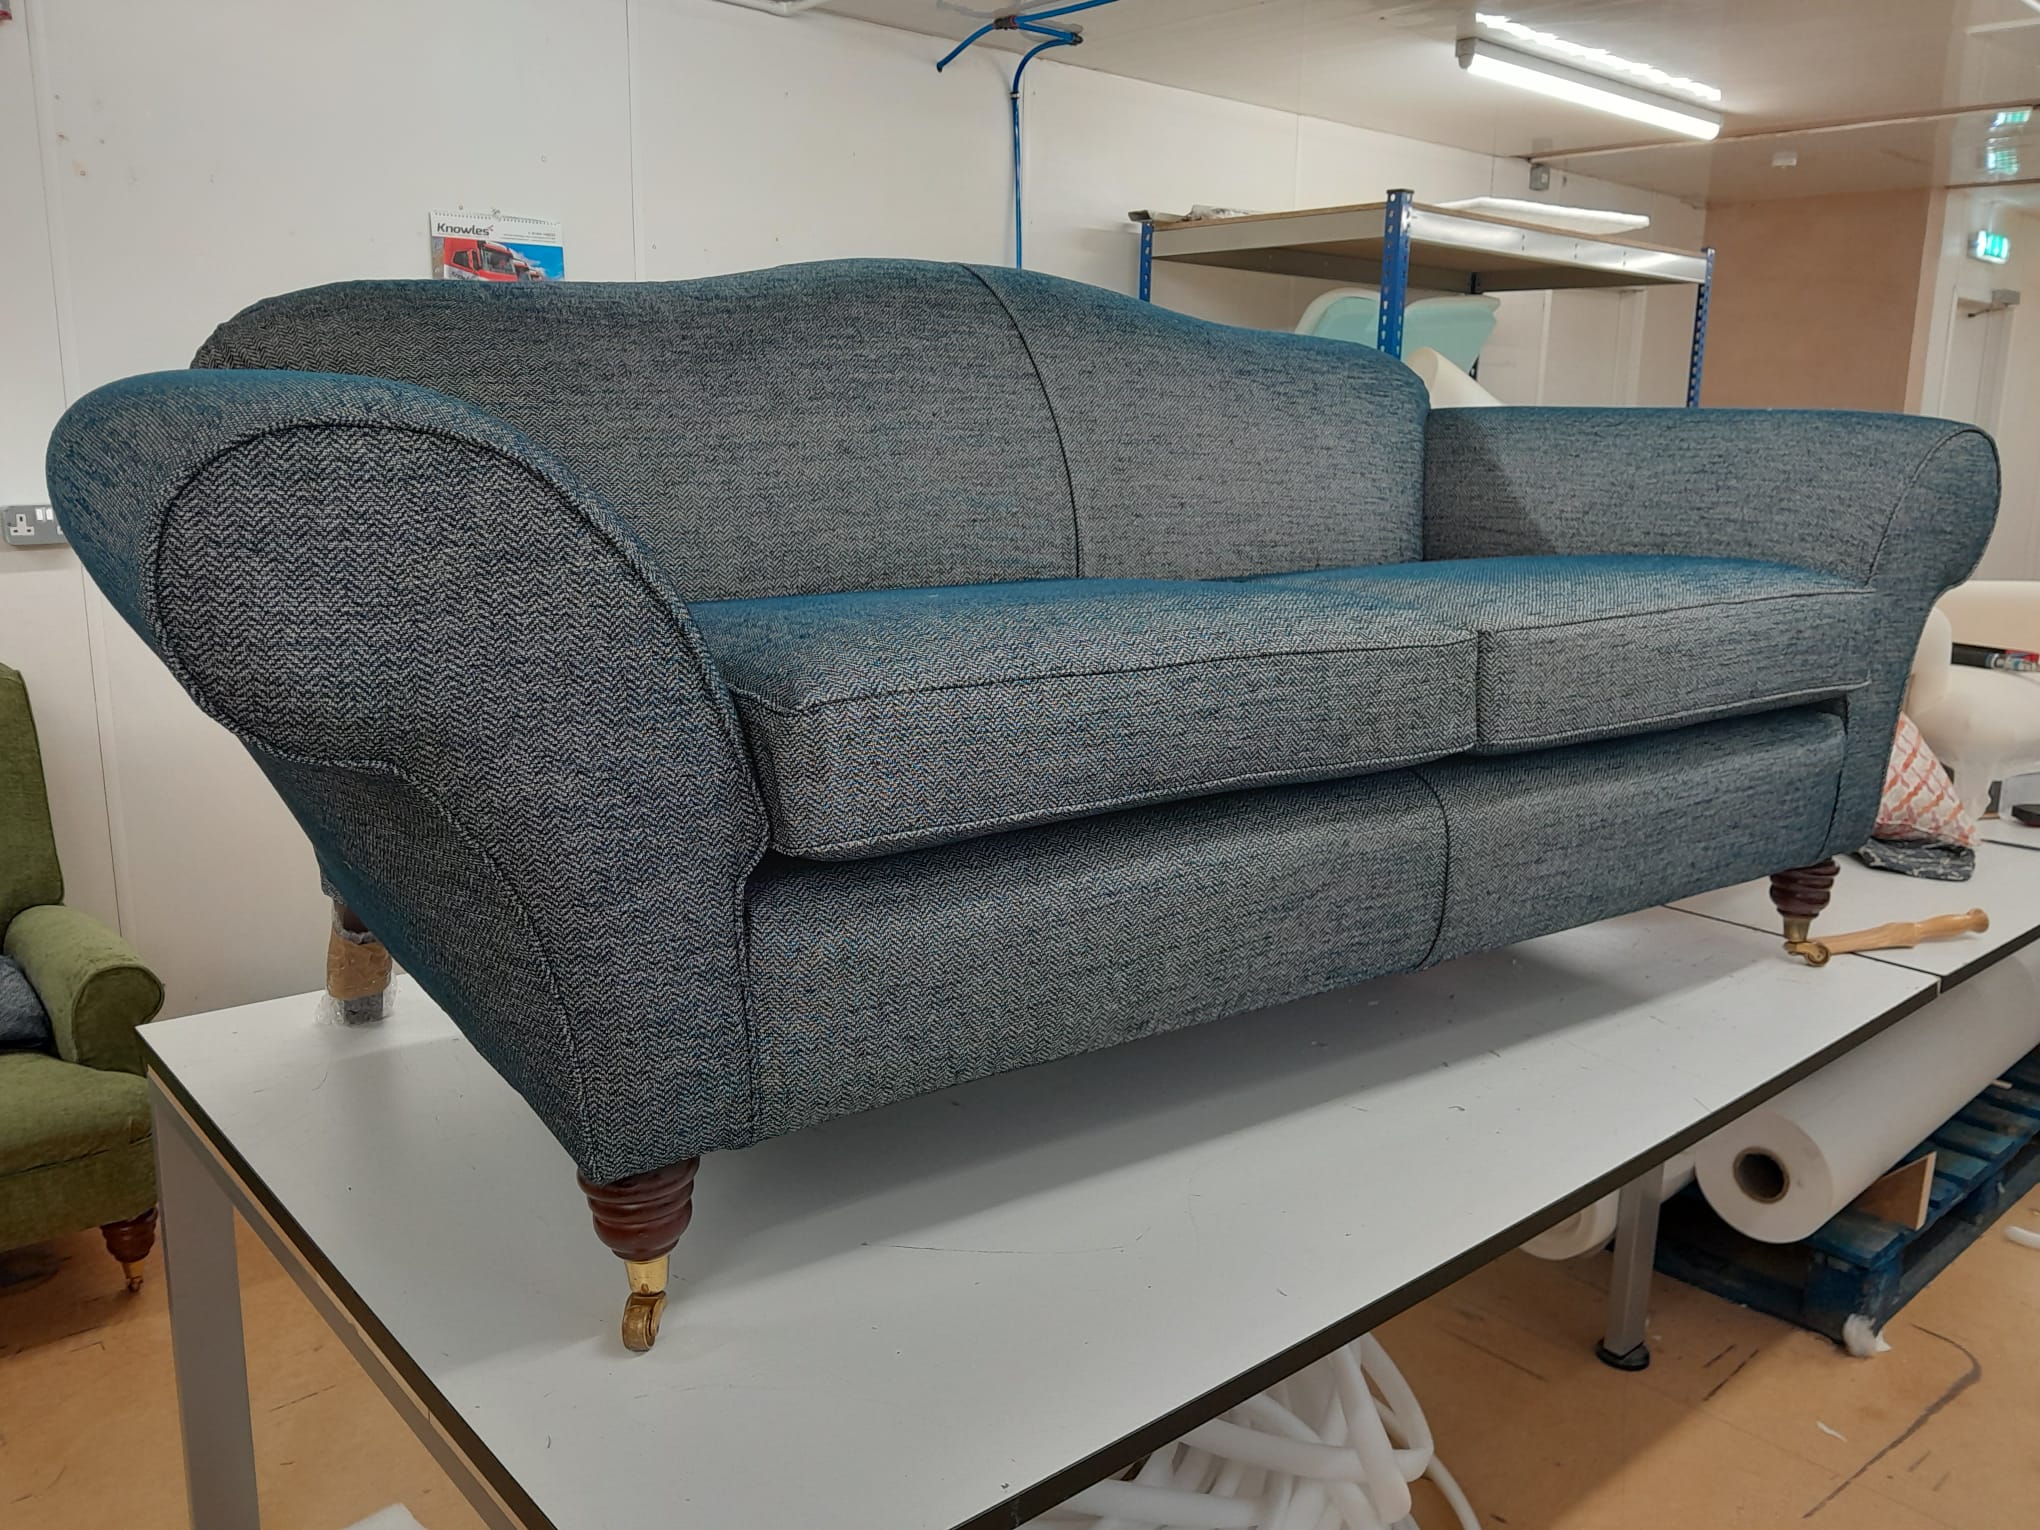 multiyork furniture upholstery replacement loose covers